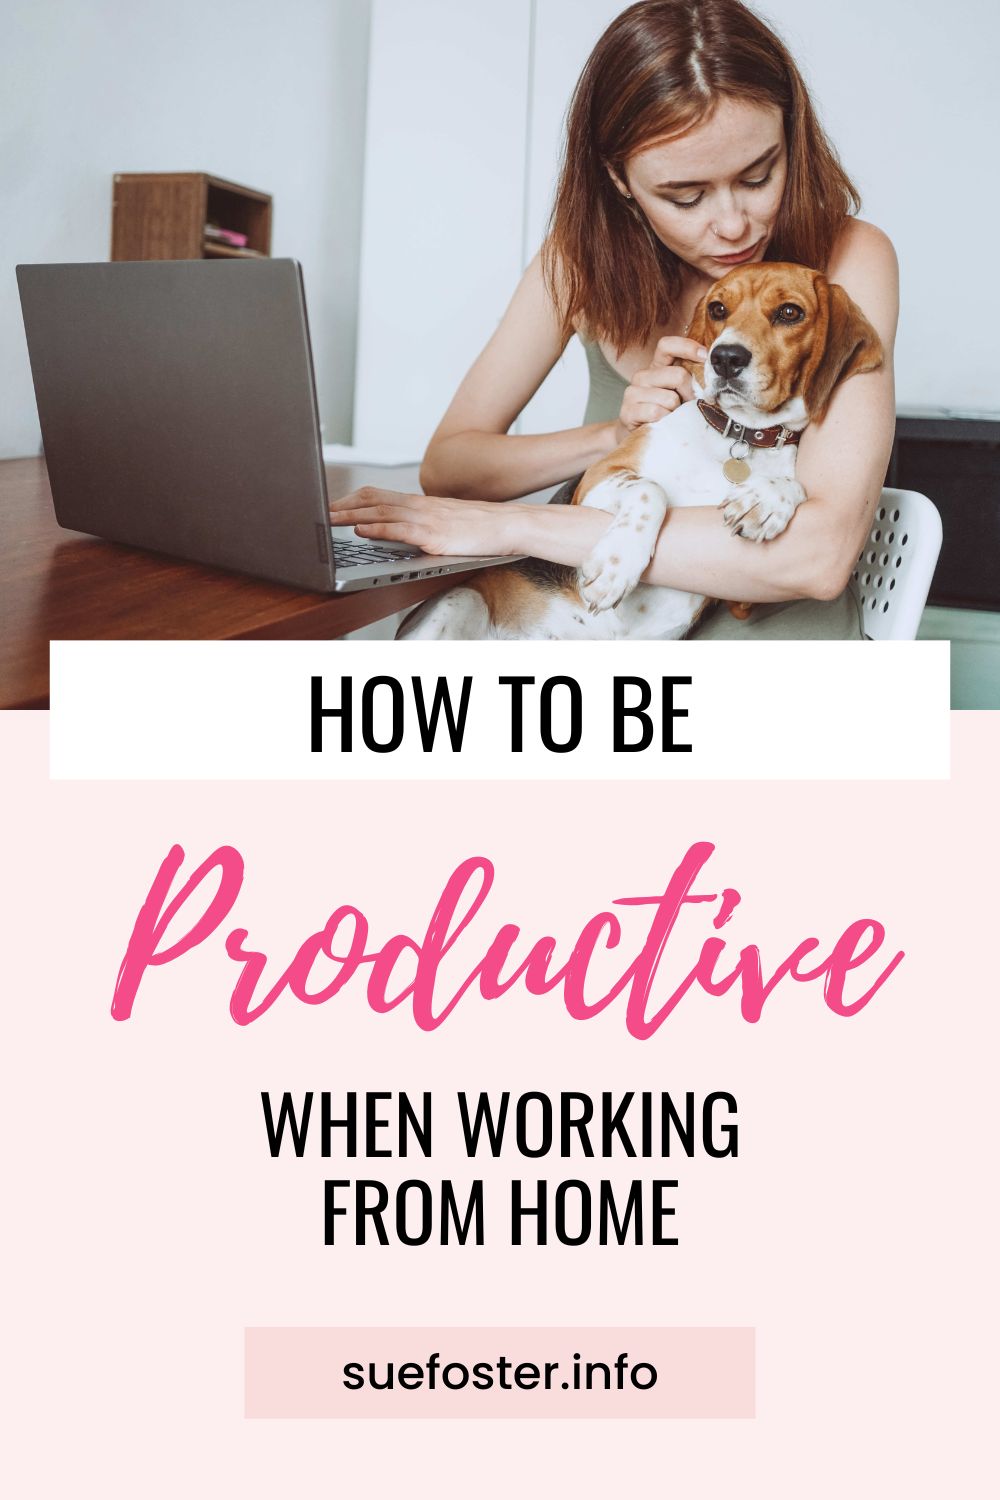 Working from home allows you to avoid commuting, but it can also affect your productivity. Know the things to do to stay productive while working from home.